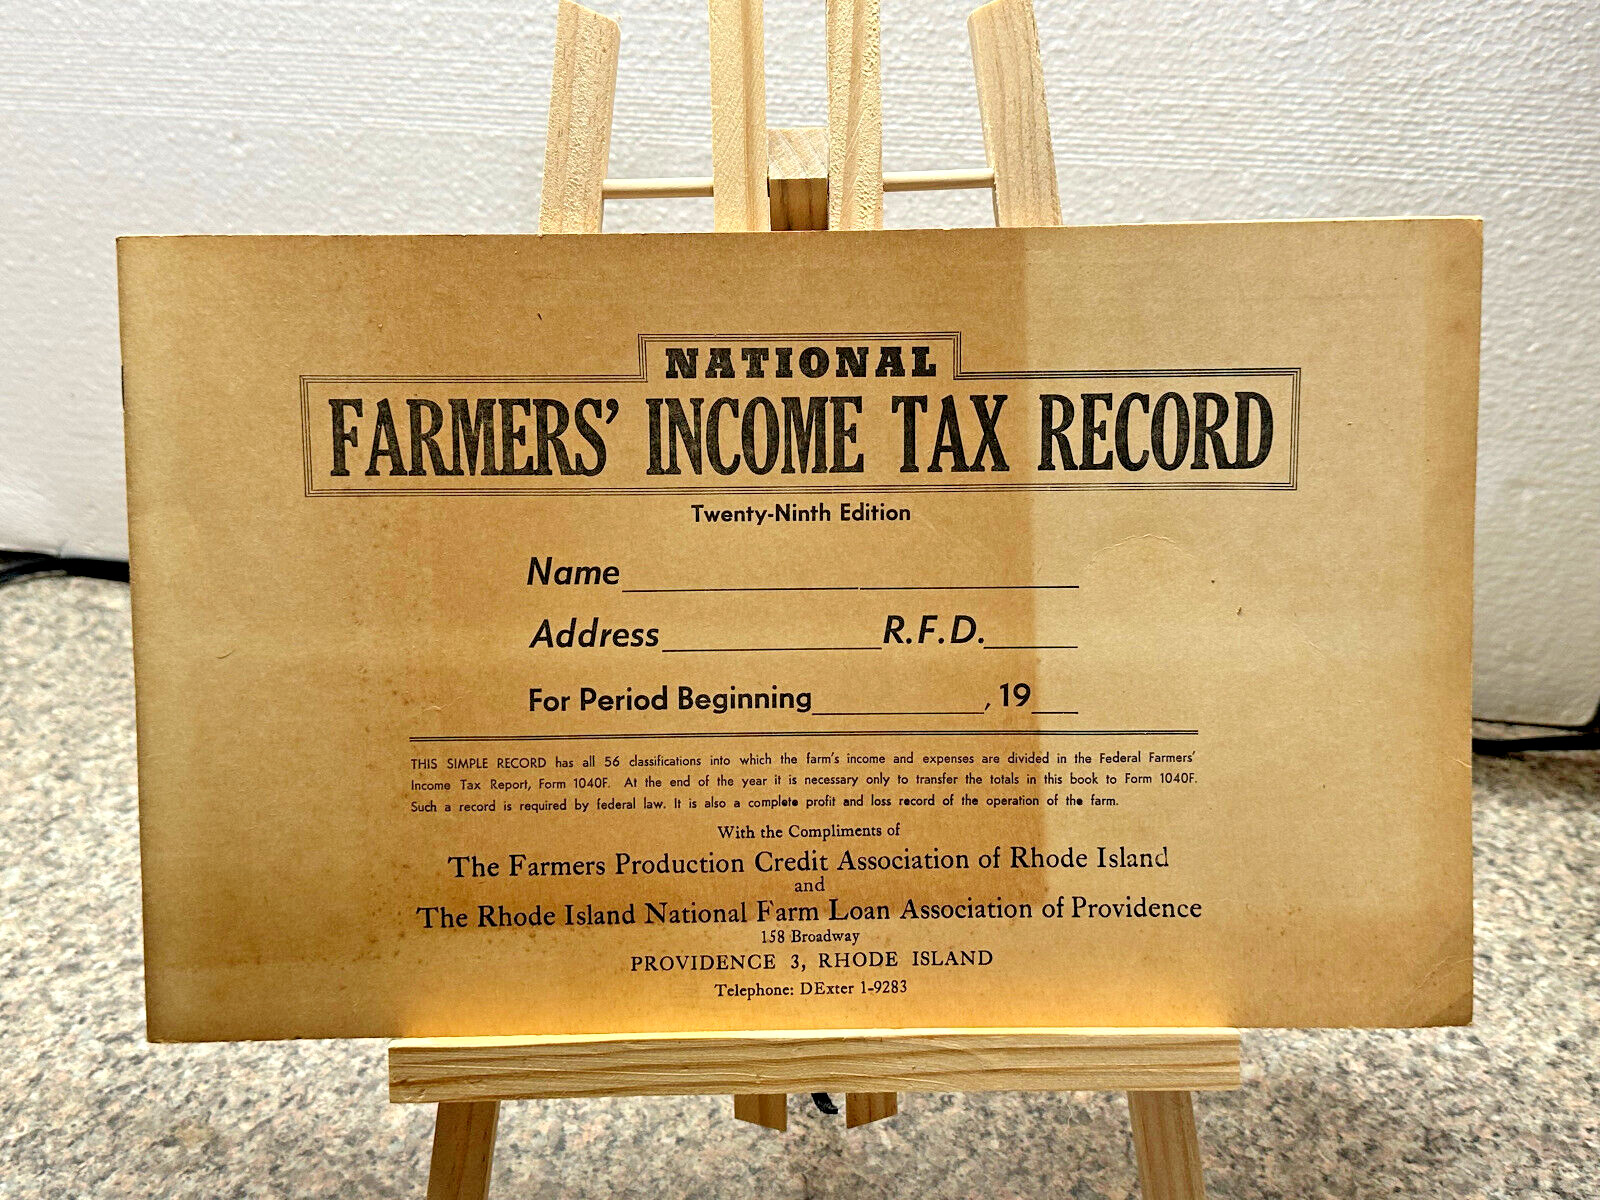 VINTAGE NATIONAL FARMERS INCOME TAX RECORD 29TH EDITION PROVIDENCE RI (1950)